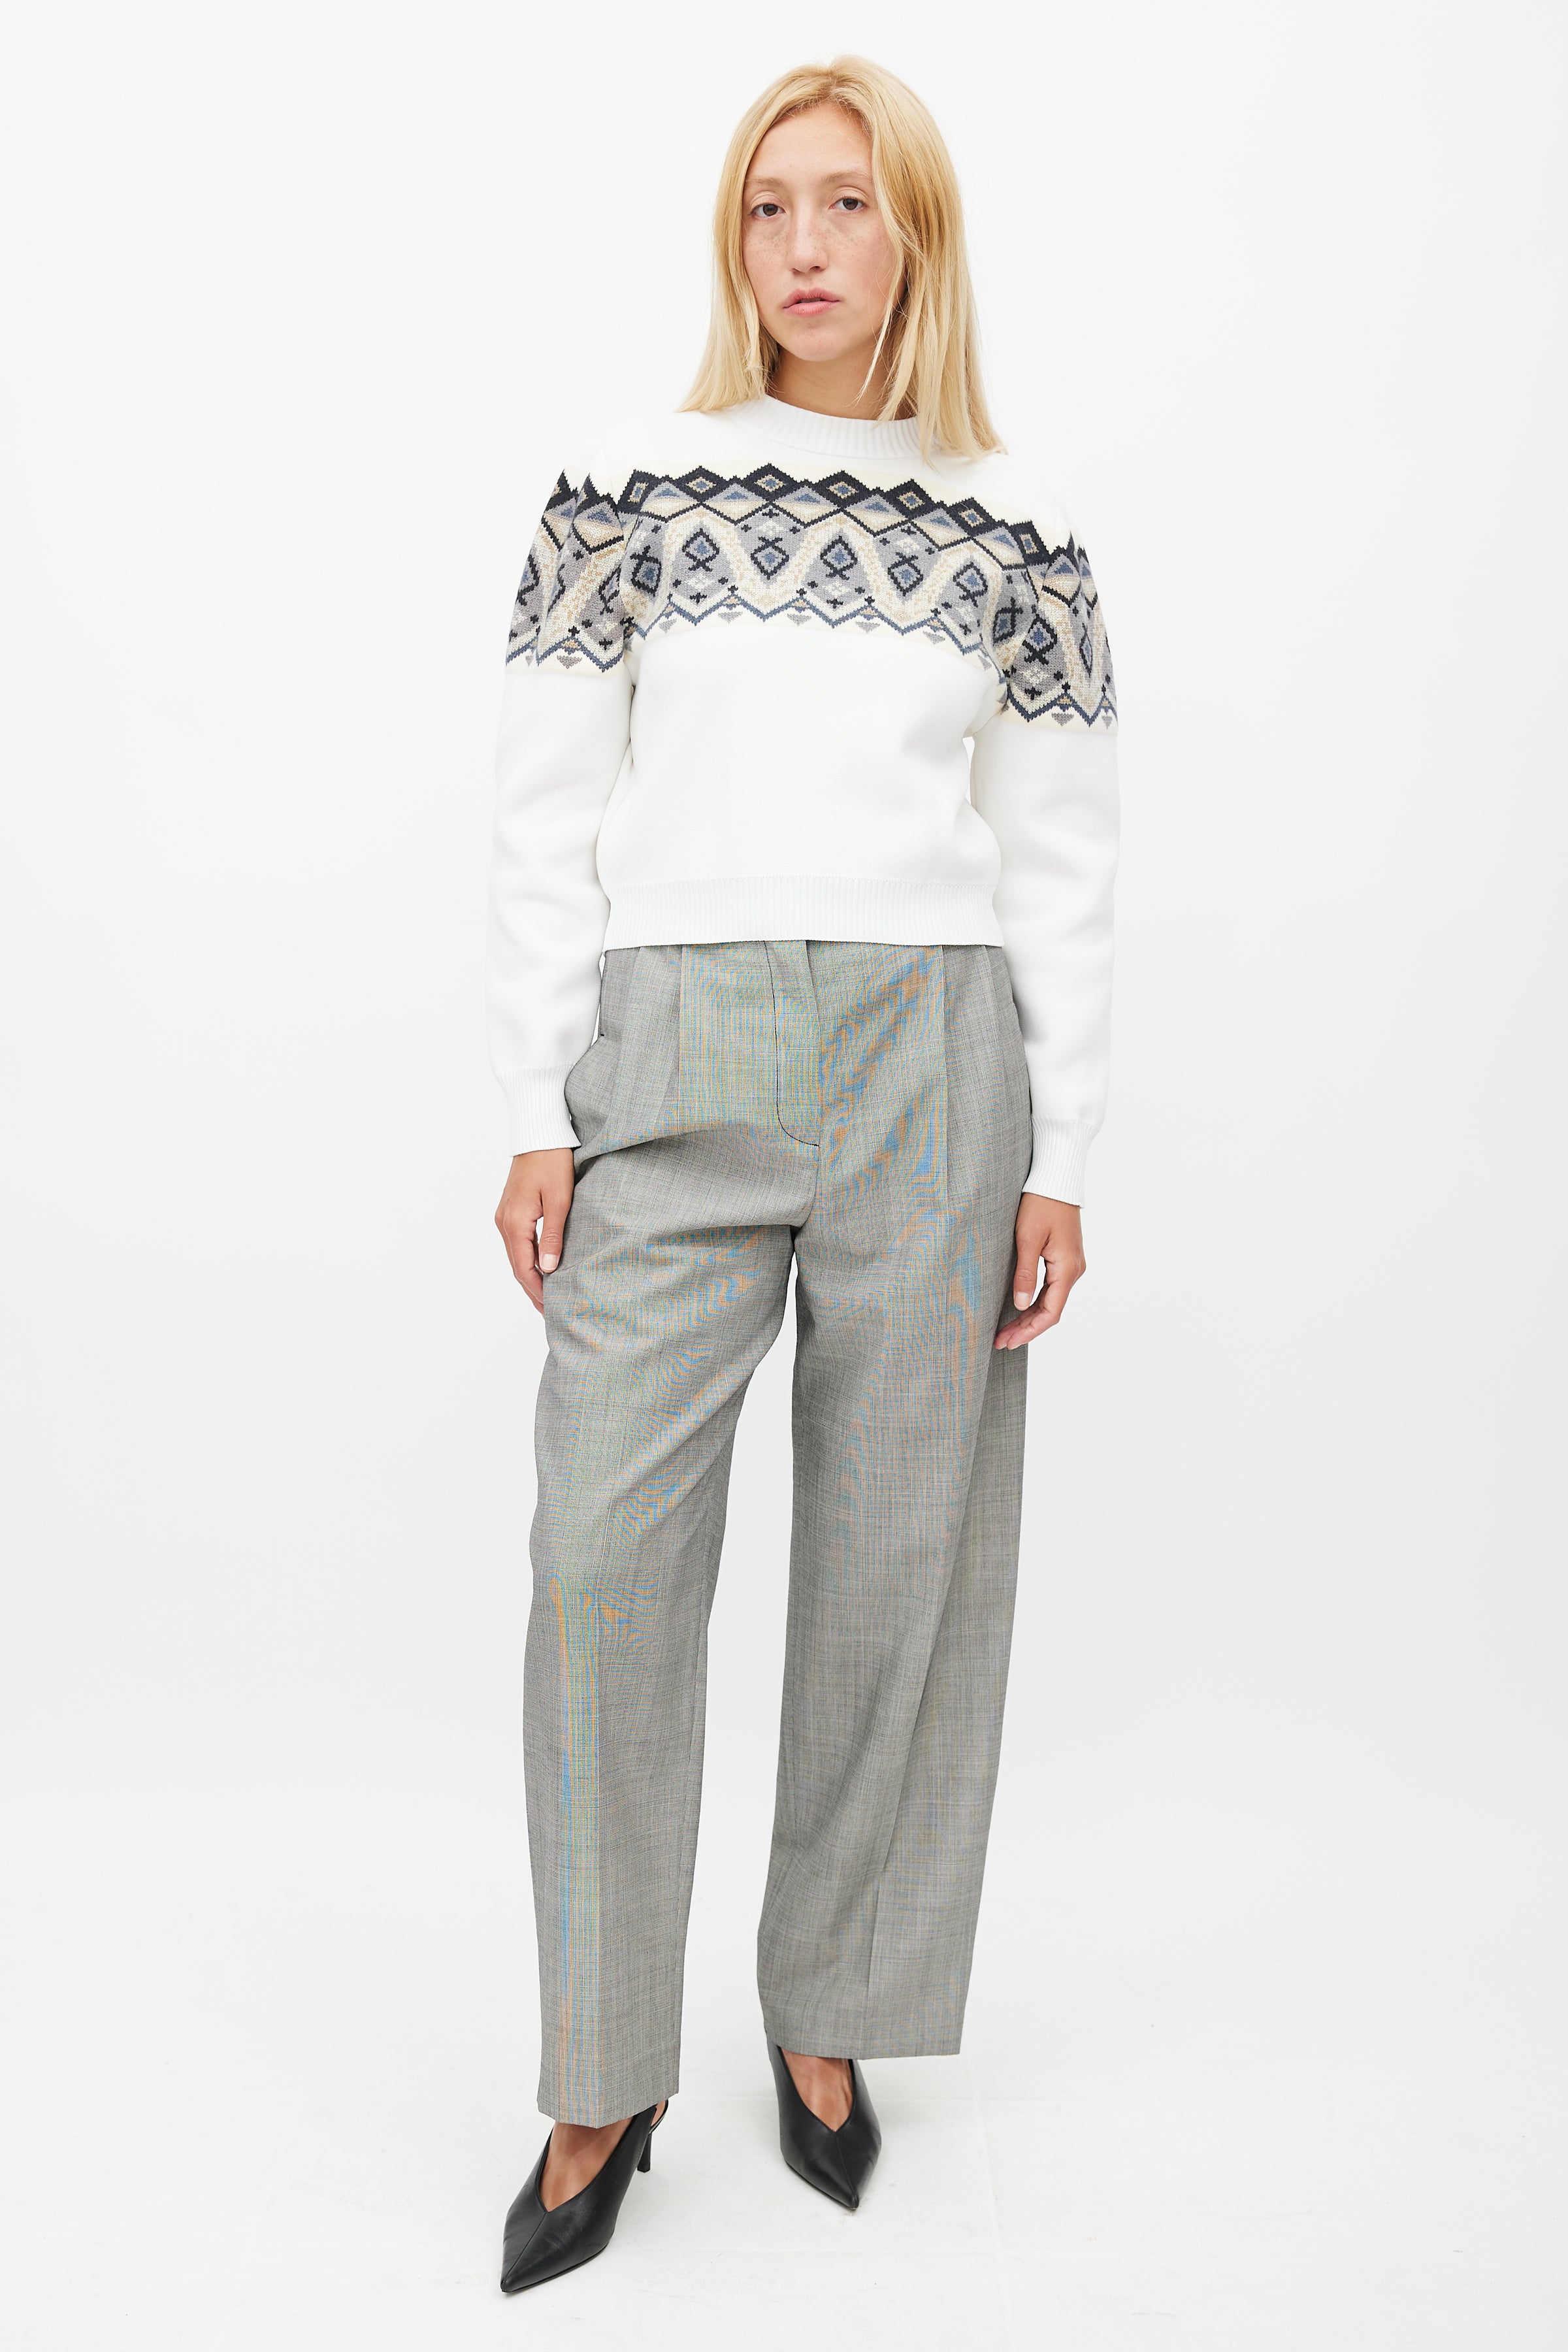 Louis Vuitton Chain Print Cropped Sweater – THE M VNTG